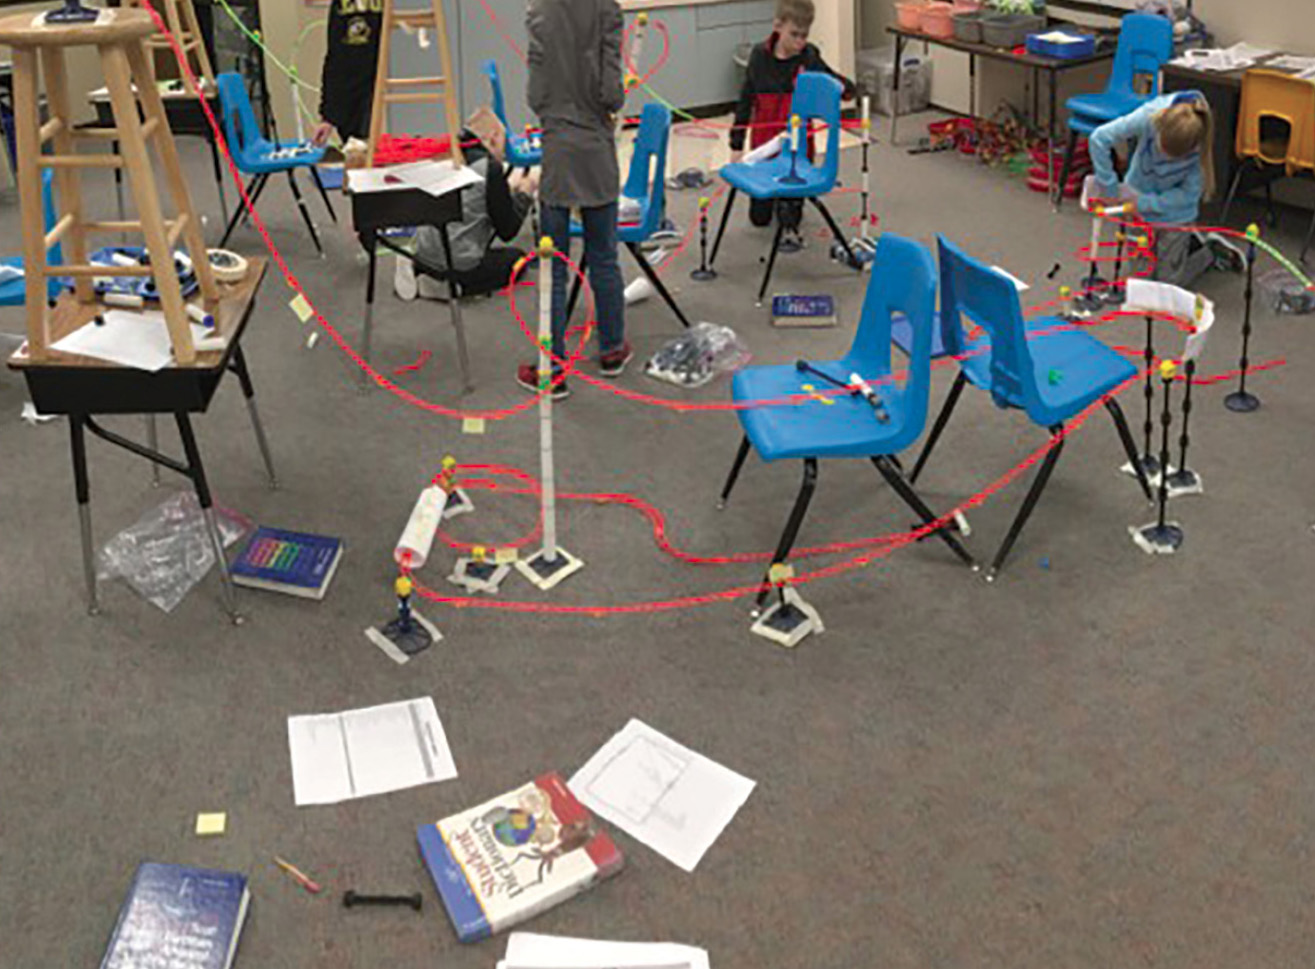 Students’ create rollercoaster designs using Newton’s laws of motion.